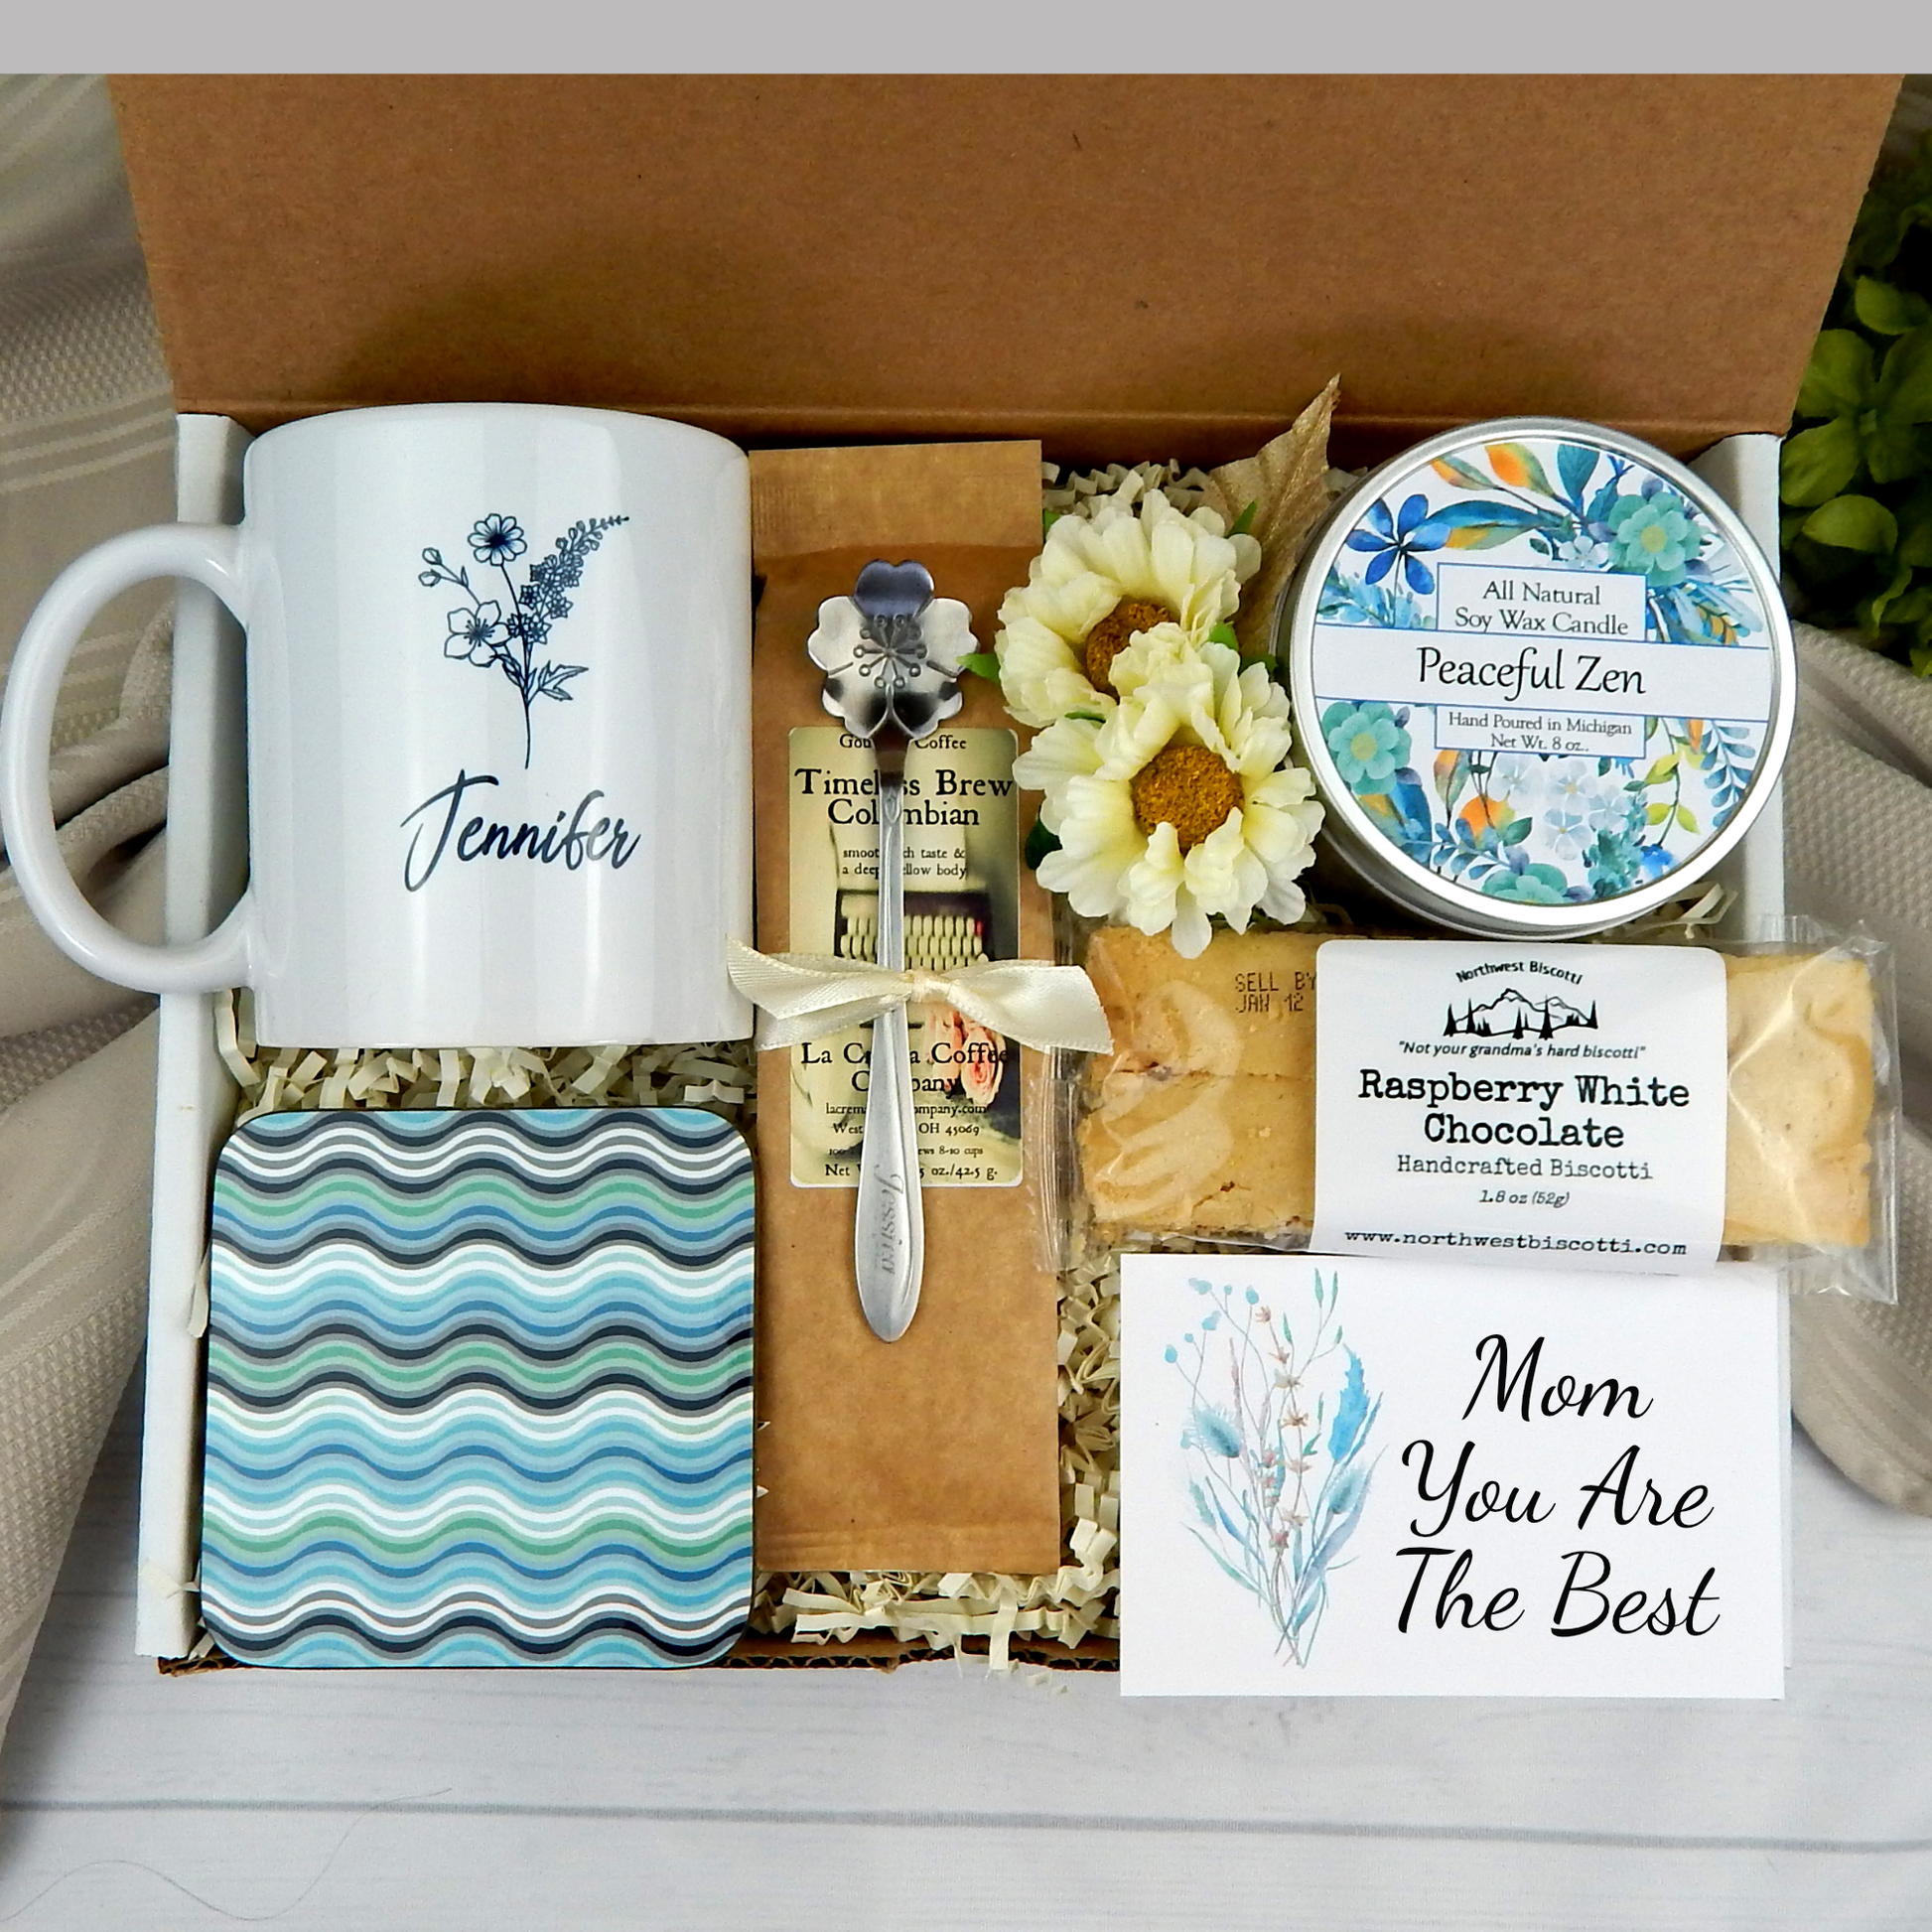 Gifts for Mom,Mom Gifts,Birthday Gifts for Mom,Mom Birthday Gifts